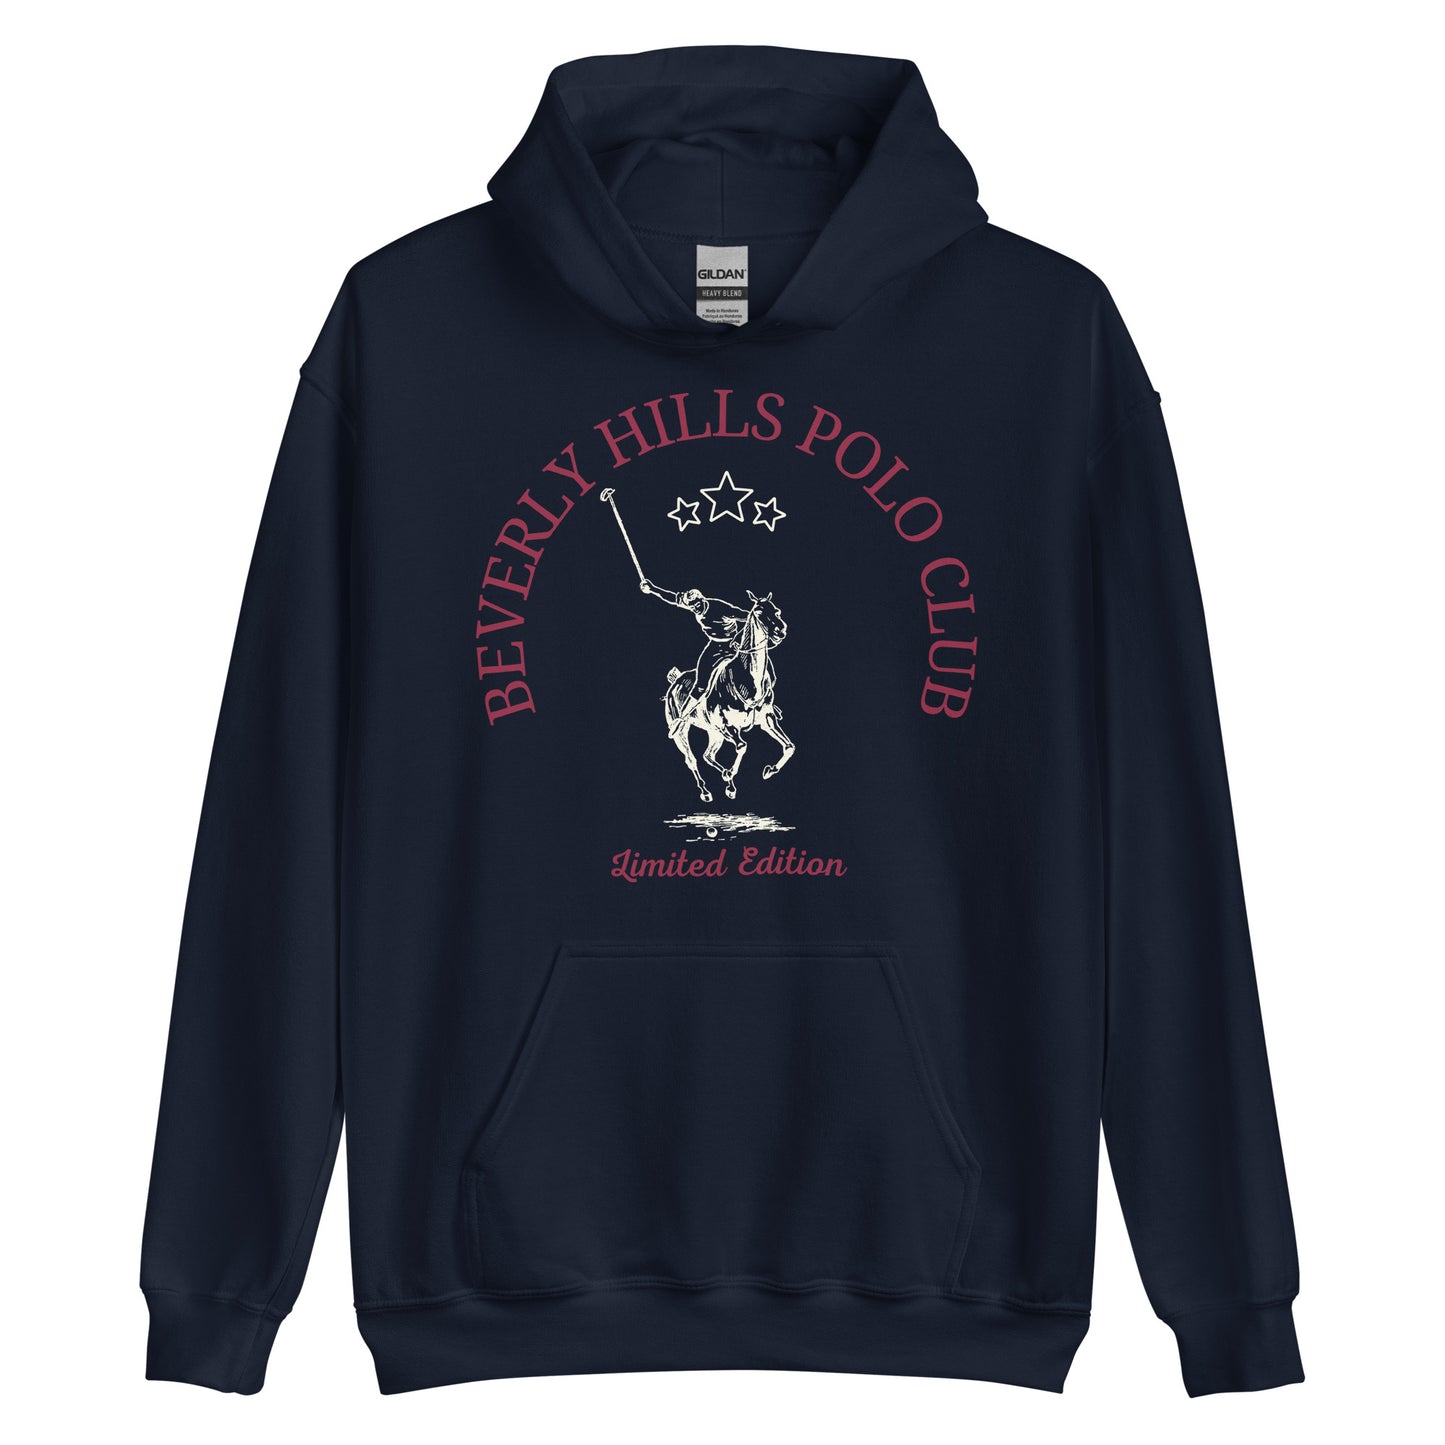 A Navy Blue hoodie features the 'Beverly Hills Polo Club' logo with a white illustration of a polo player on horseback, accompanied by three white stars above and the words 'Limited Edition' below. The design is centered on the chest of the hoodie, which has a front pouch pocket and is displayed on a plain background.